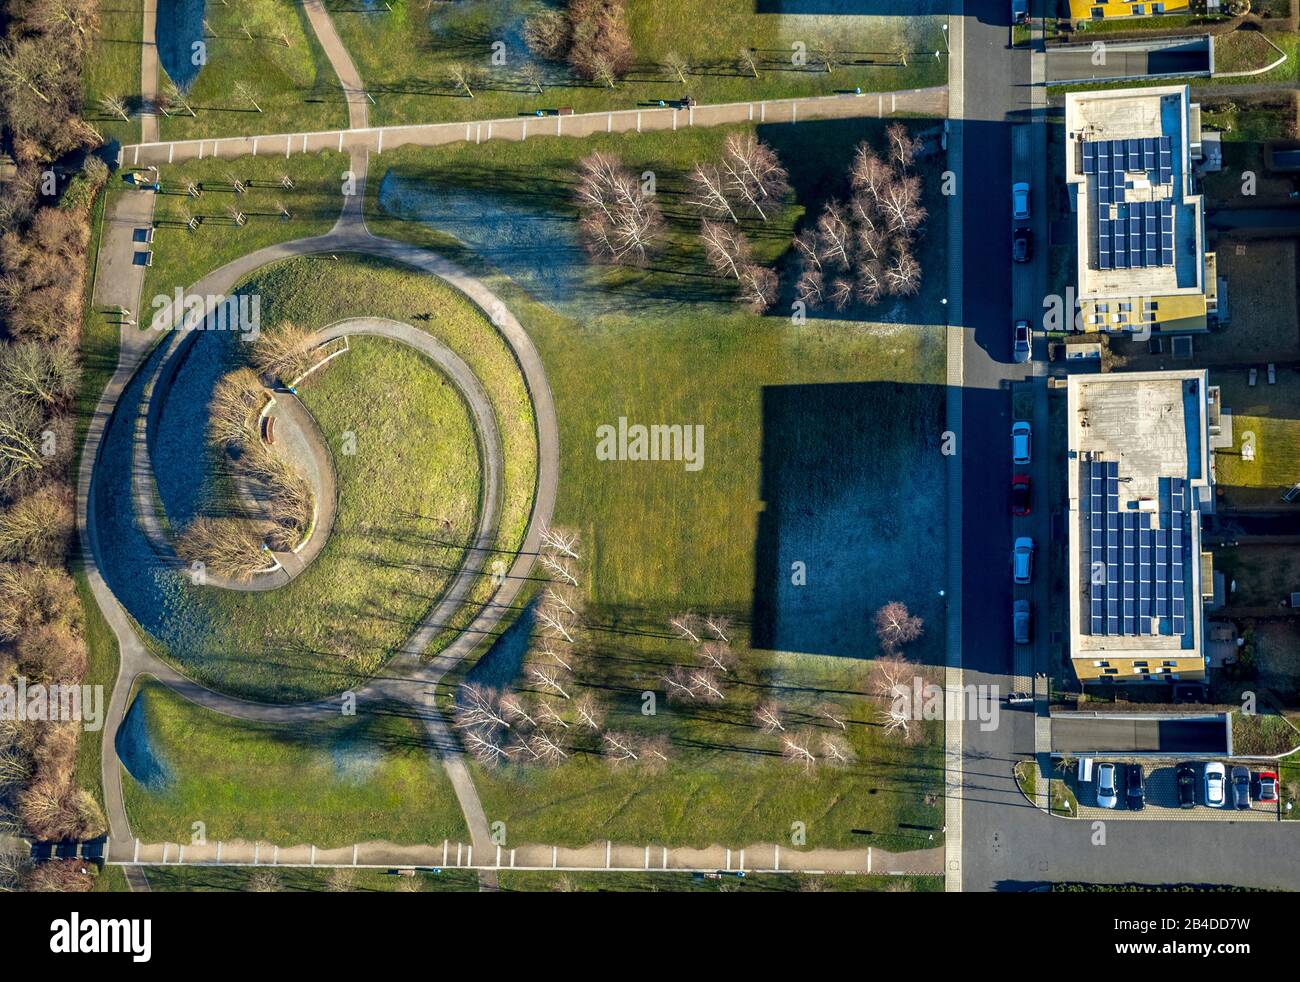 Aerial view, Ying Yang symbol, playground with round hill, mountain bike facility, Dilldorfer Höhe, Frauenstein, Essen, North Rhine-Westphalia, Germany Stock Photo